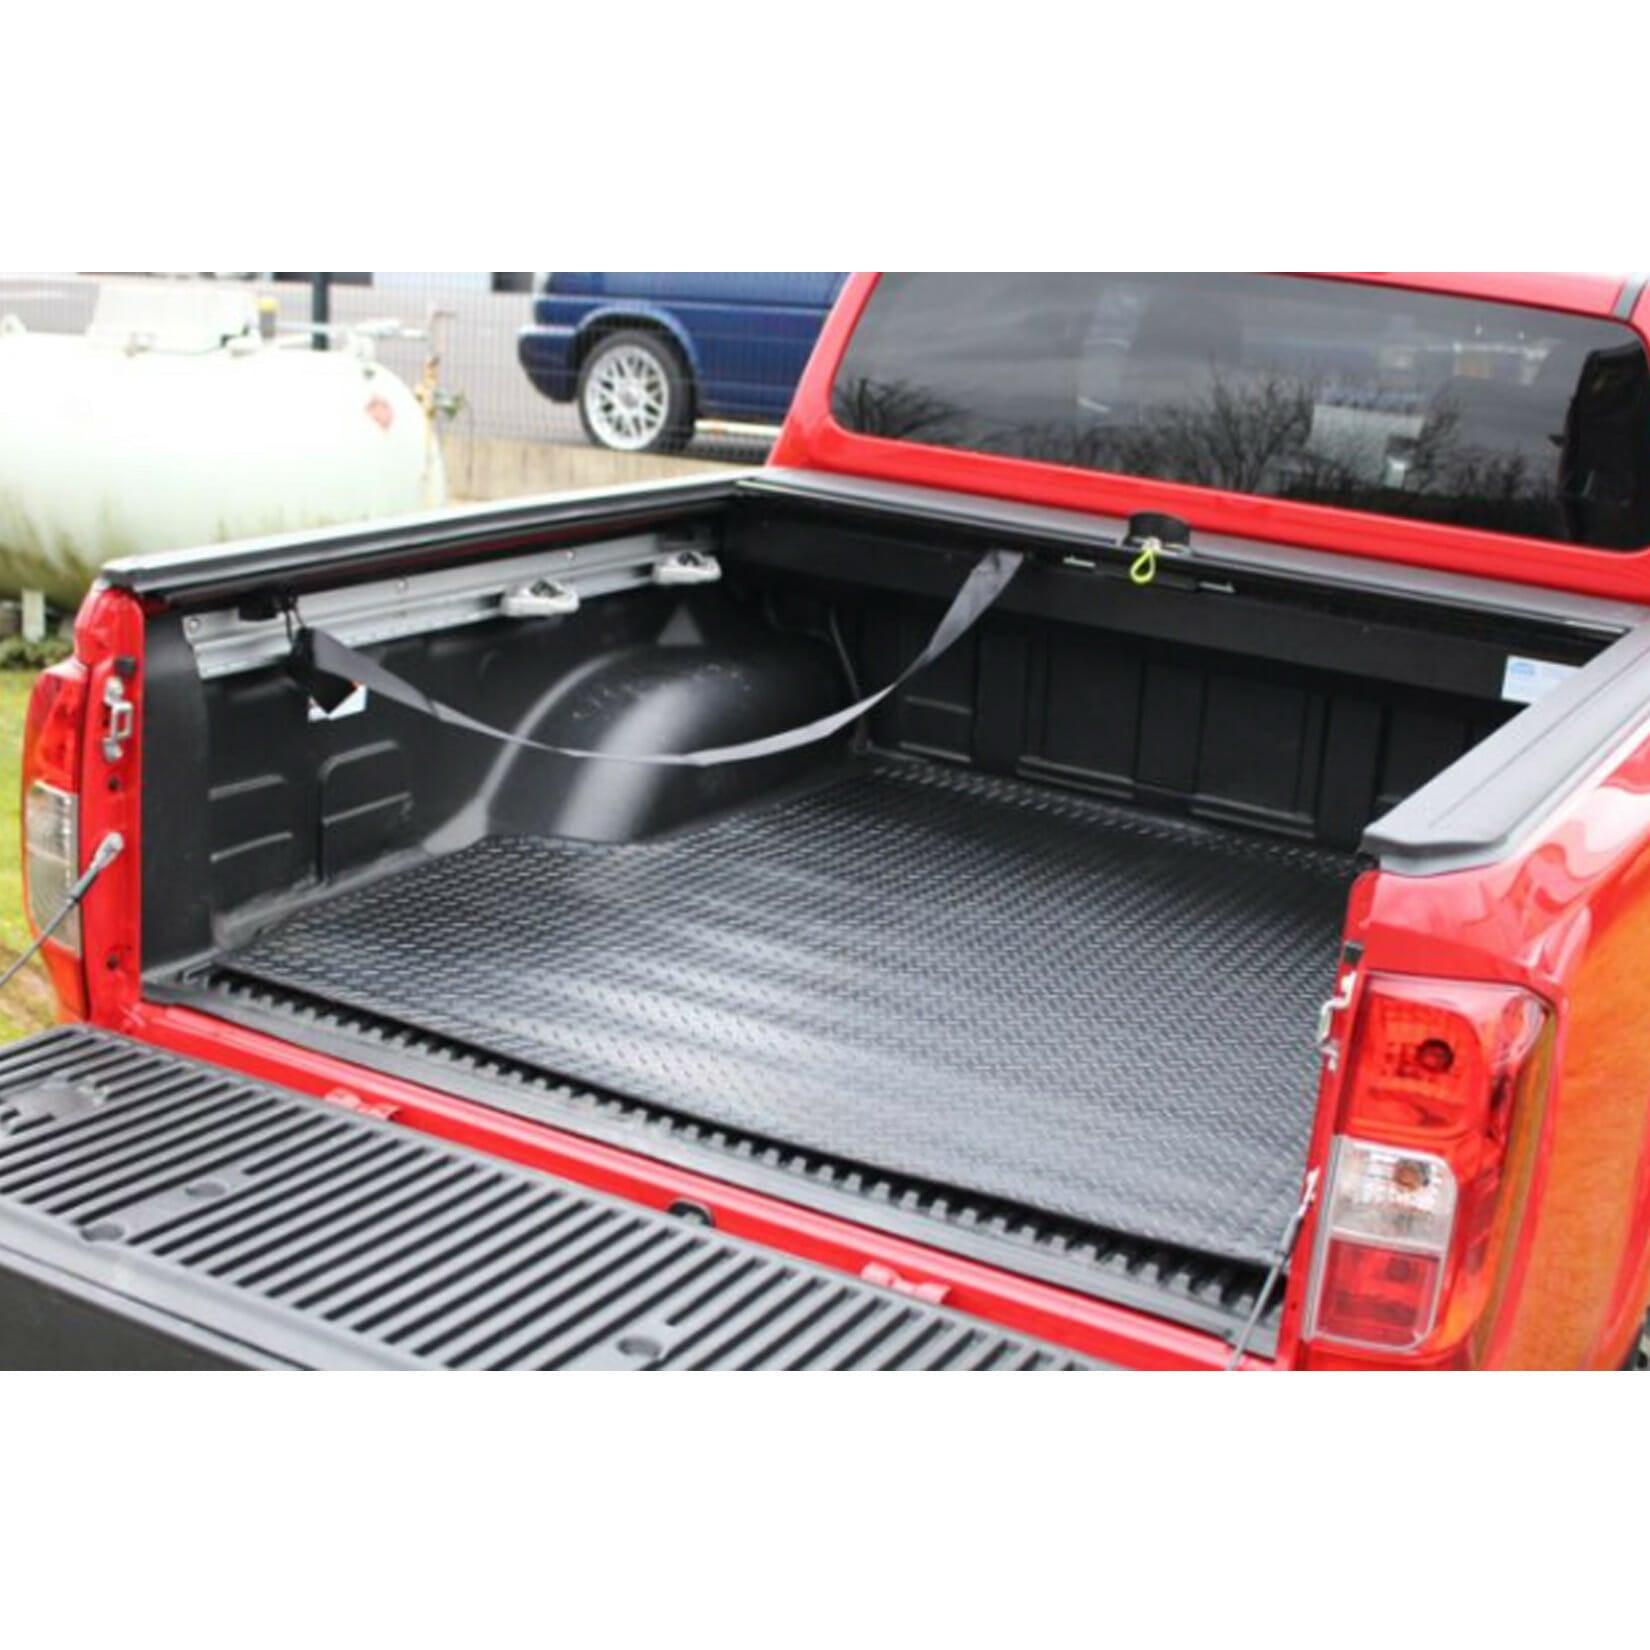 NISSAN NAVARA NP300 2016 ON DOUBLE CAB LOAD BED RUBBER MAT BLACK - Storm Xccessories2